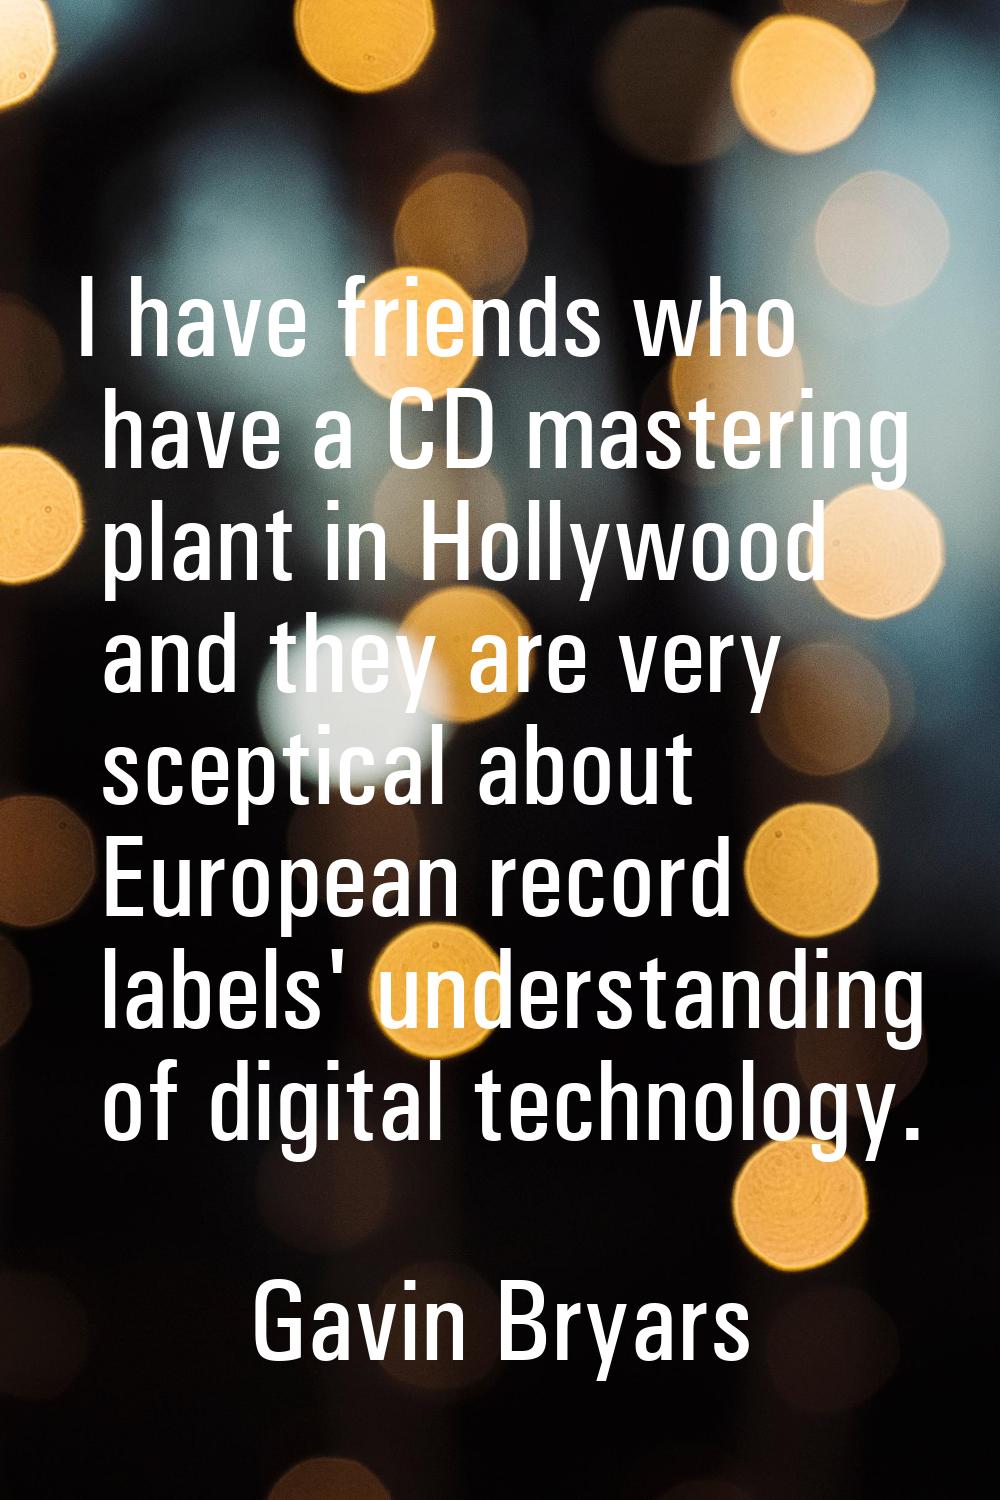 I have friends who have a CD mastering plant in Hollywood and they are very sceptical about Europea